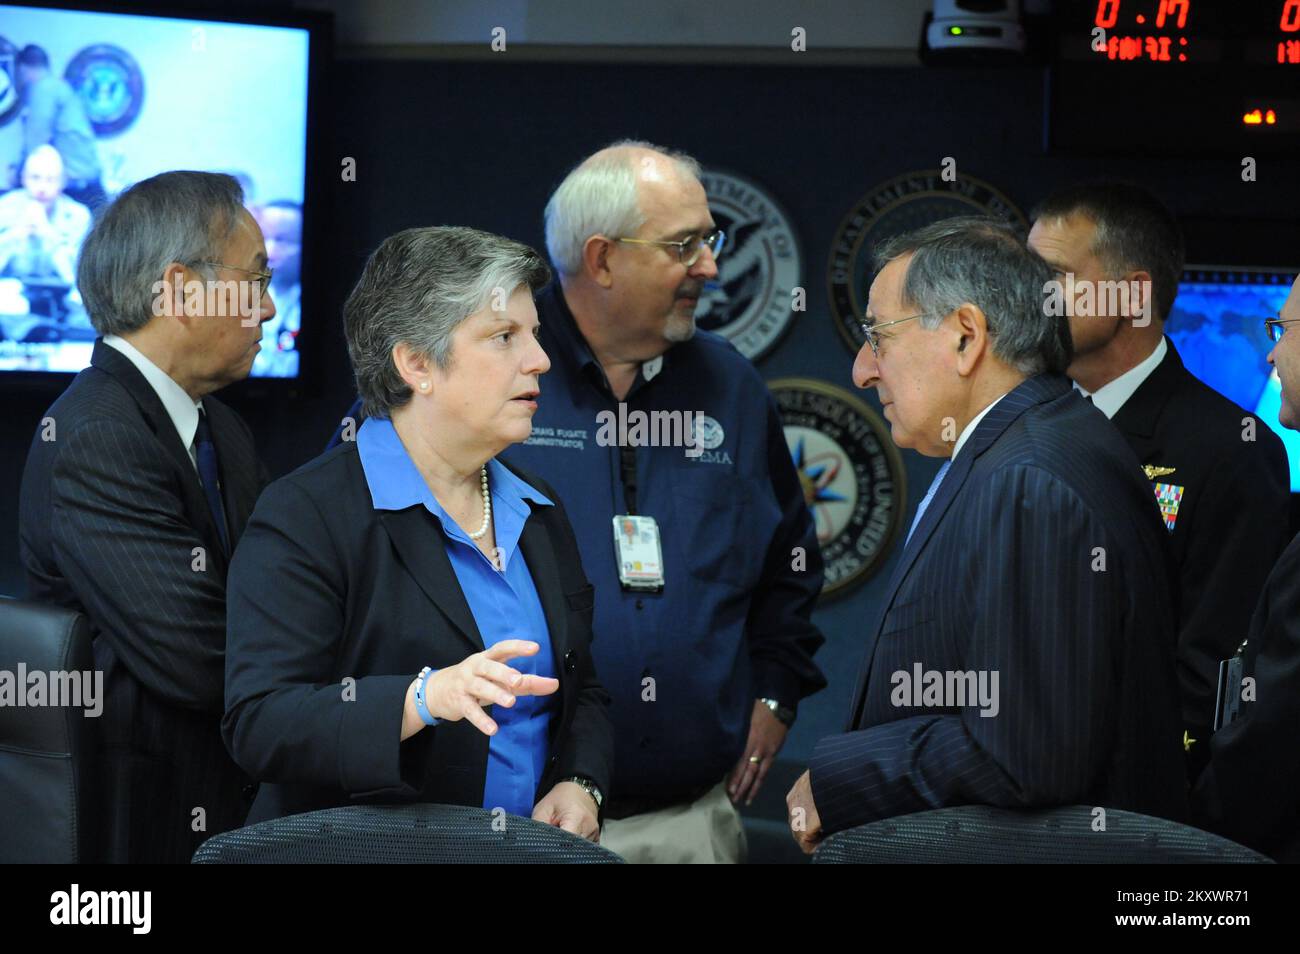 Washington, D.C., Oct. 31, 2012   Department of Homeland Security Secretary Janet Napolitano speaks to Defense Secretary Leon Panetta prior to the start of a cabinet meeting that President Barack Obama held at FEMA headquarters to discuss ongoing operations in response to Hurricane Sandy. Washington, DC, USA--October 31, 2012-Department of Homeland Security Secretary Janet Napolitano speaks to Defense Secretary Leon Panetta prior to the start of a cabinet meeting that President Barack Obama held at FEMA headquarters to discuss ongoing operations in response to Hurricane Sandy.. Photographs Rel Stock Photo